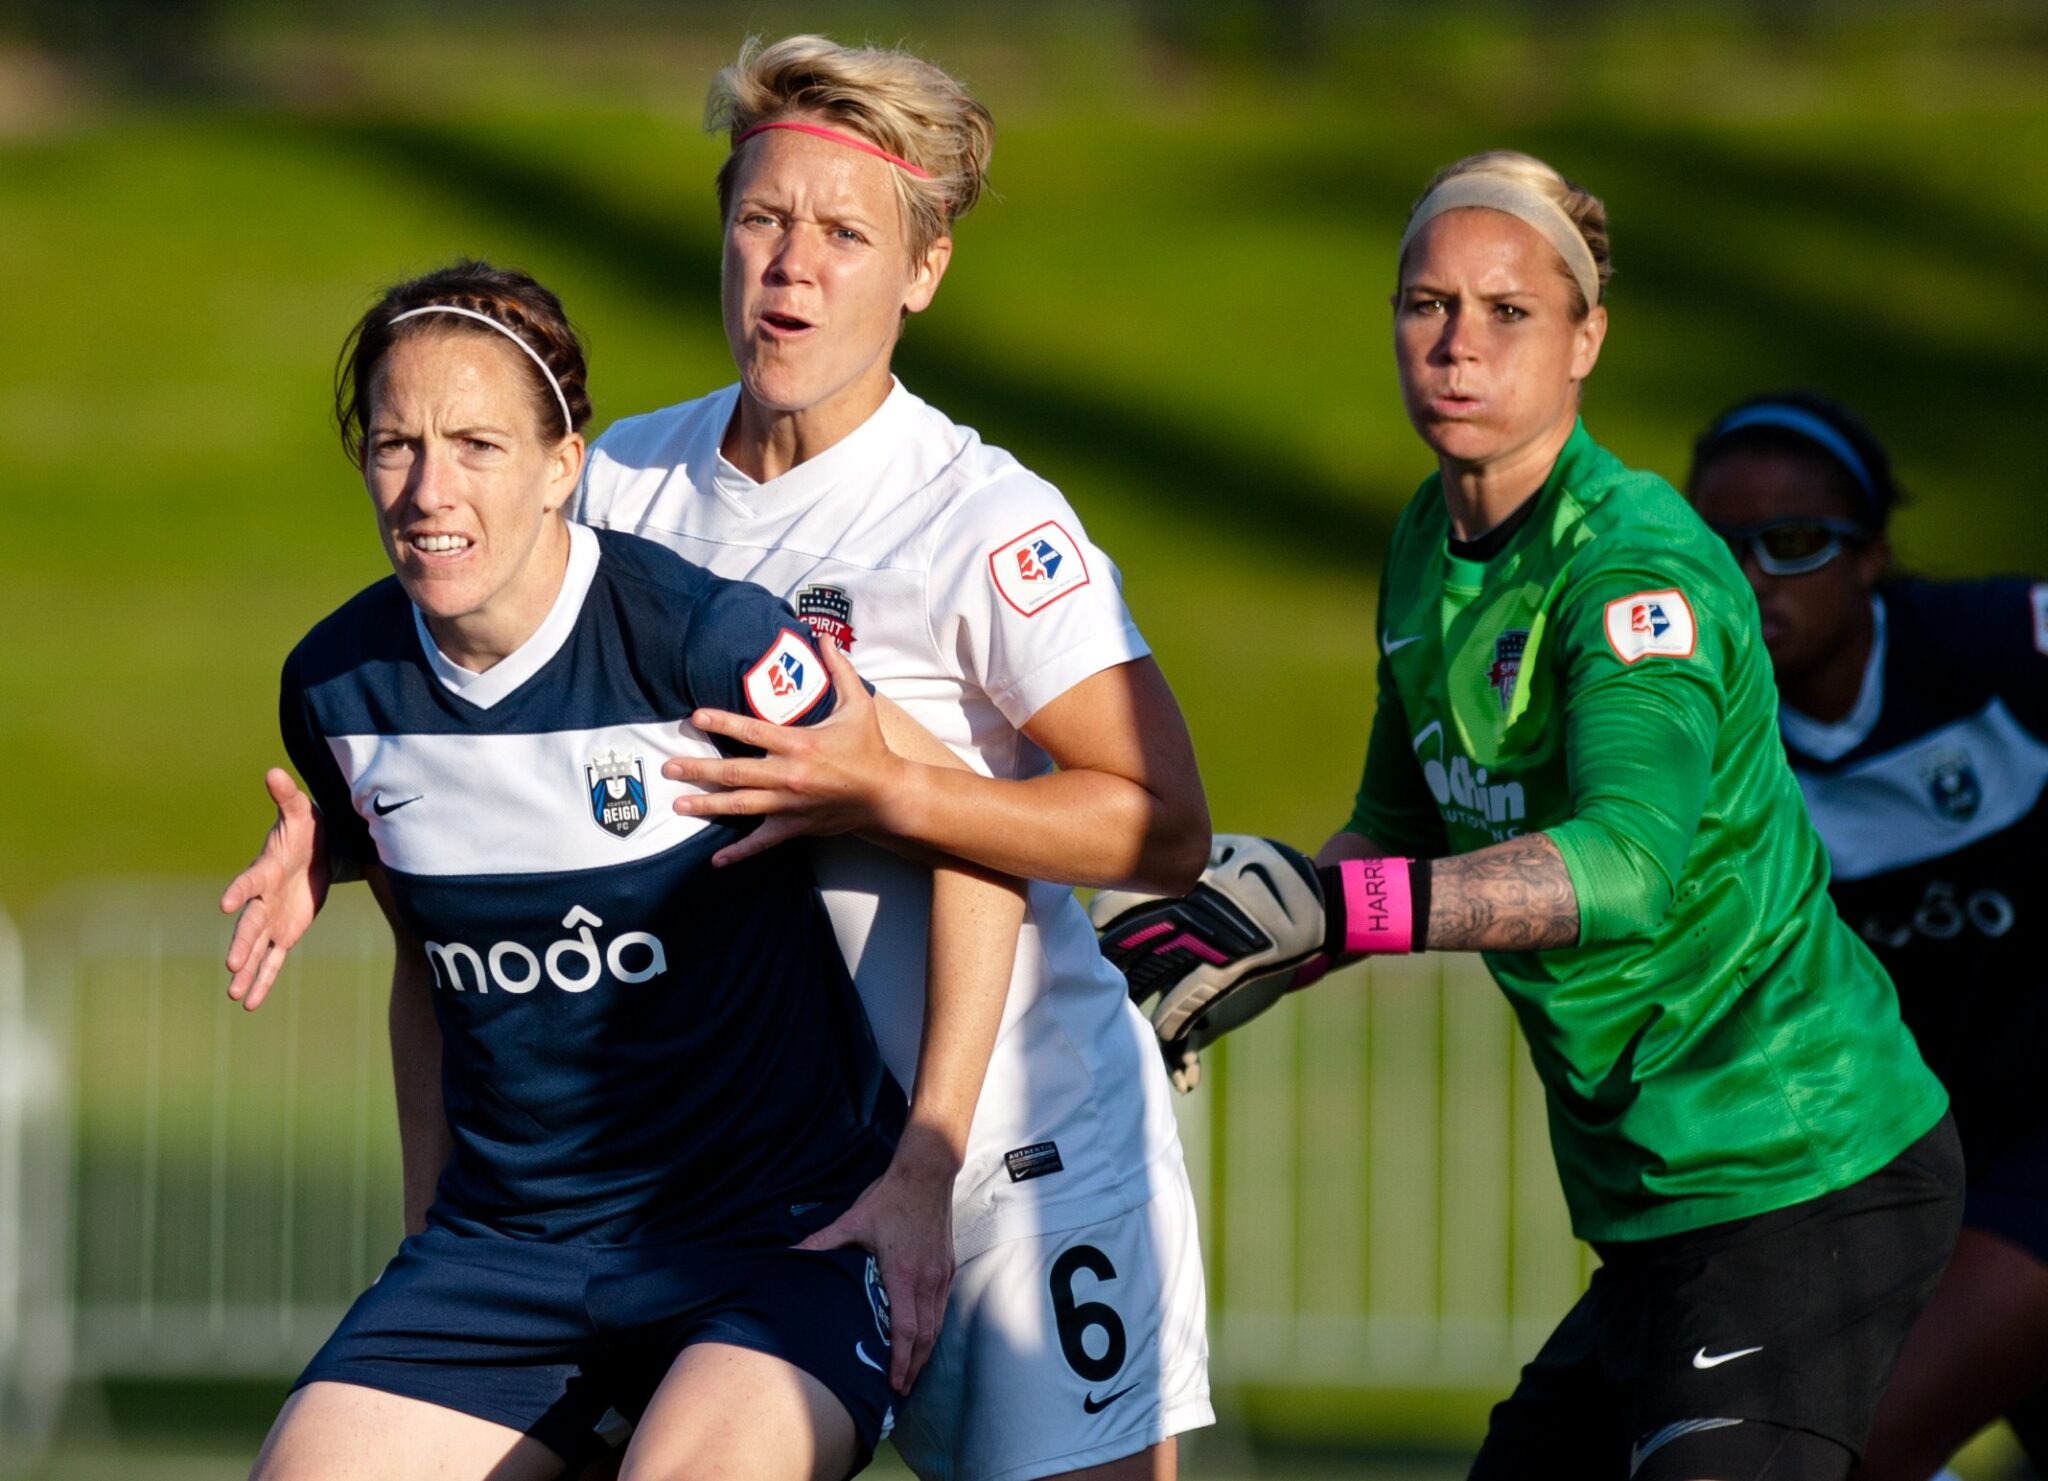 NWSL debuts on FOX Soccer with Spirit visit to Seattle Featured Image